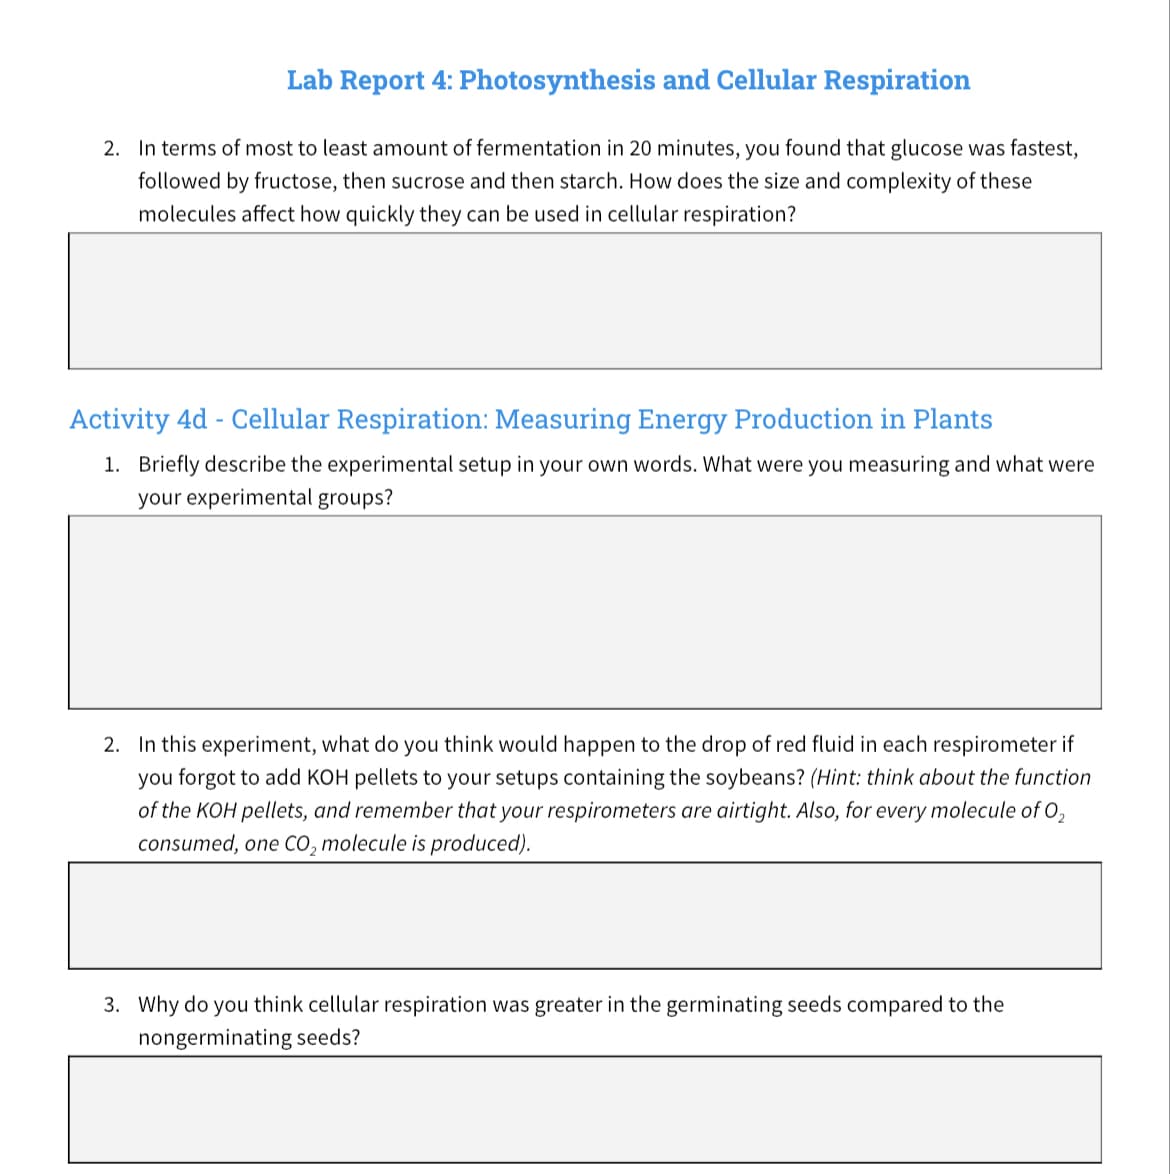 Lab Report 4: Photosynthesis and Cellular Respiration
2. In terms of most to least amount f fermentation in 20 minutes, you found that glucose was fastest,
followed by fructose, then sucrose and then starch. How does the size and complexity of these
molecules affect how quickly they can be used in cellular respiration?
Activity 4d - Cellular Respiration: Measuring Energy Production in Plants
1. Briefly describe the experimental setup in your own words. What were you measuring and what were
your experimental groups?
2. In this experiment, what do you think would happen to the drop of red fluid in each respirometer if
you forgot to add KOH pellets to your setups containing the soybeans? (Hint: think about the function
of the KOH pellets, and remember that your respirometers are airtight. Also, for every molecule of 0₂
consumed, one CO₂ molecule is produced).
3. Why do you think cellular respiration was greater in the germinating seeds compared to the
nongerminating seeds?